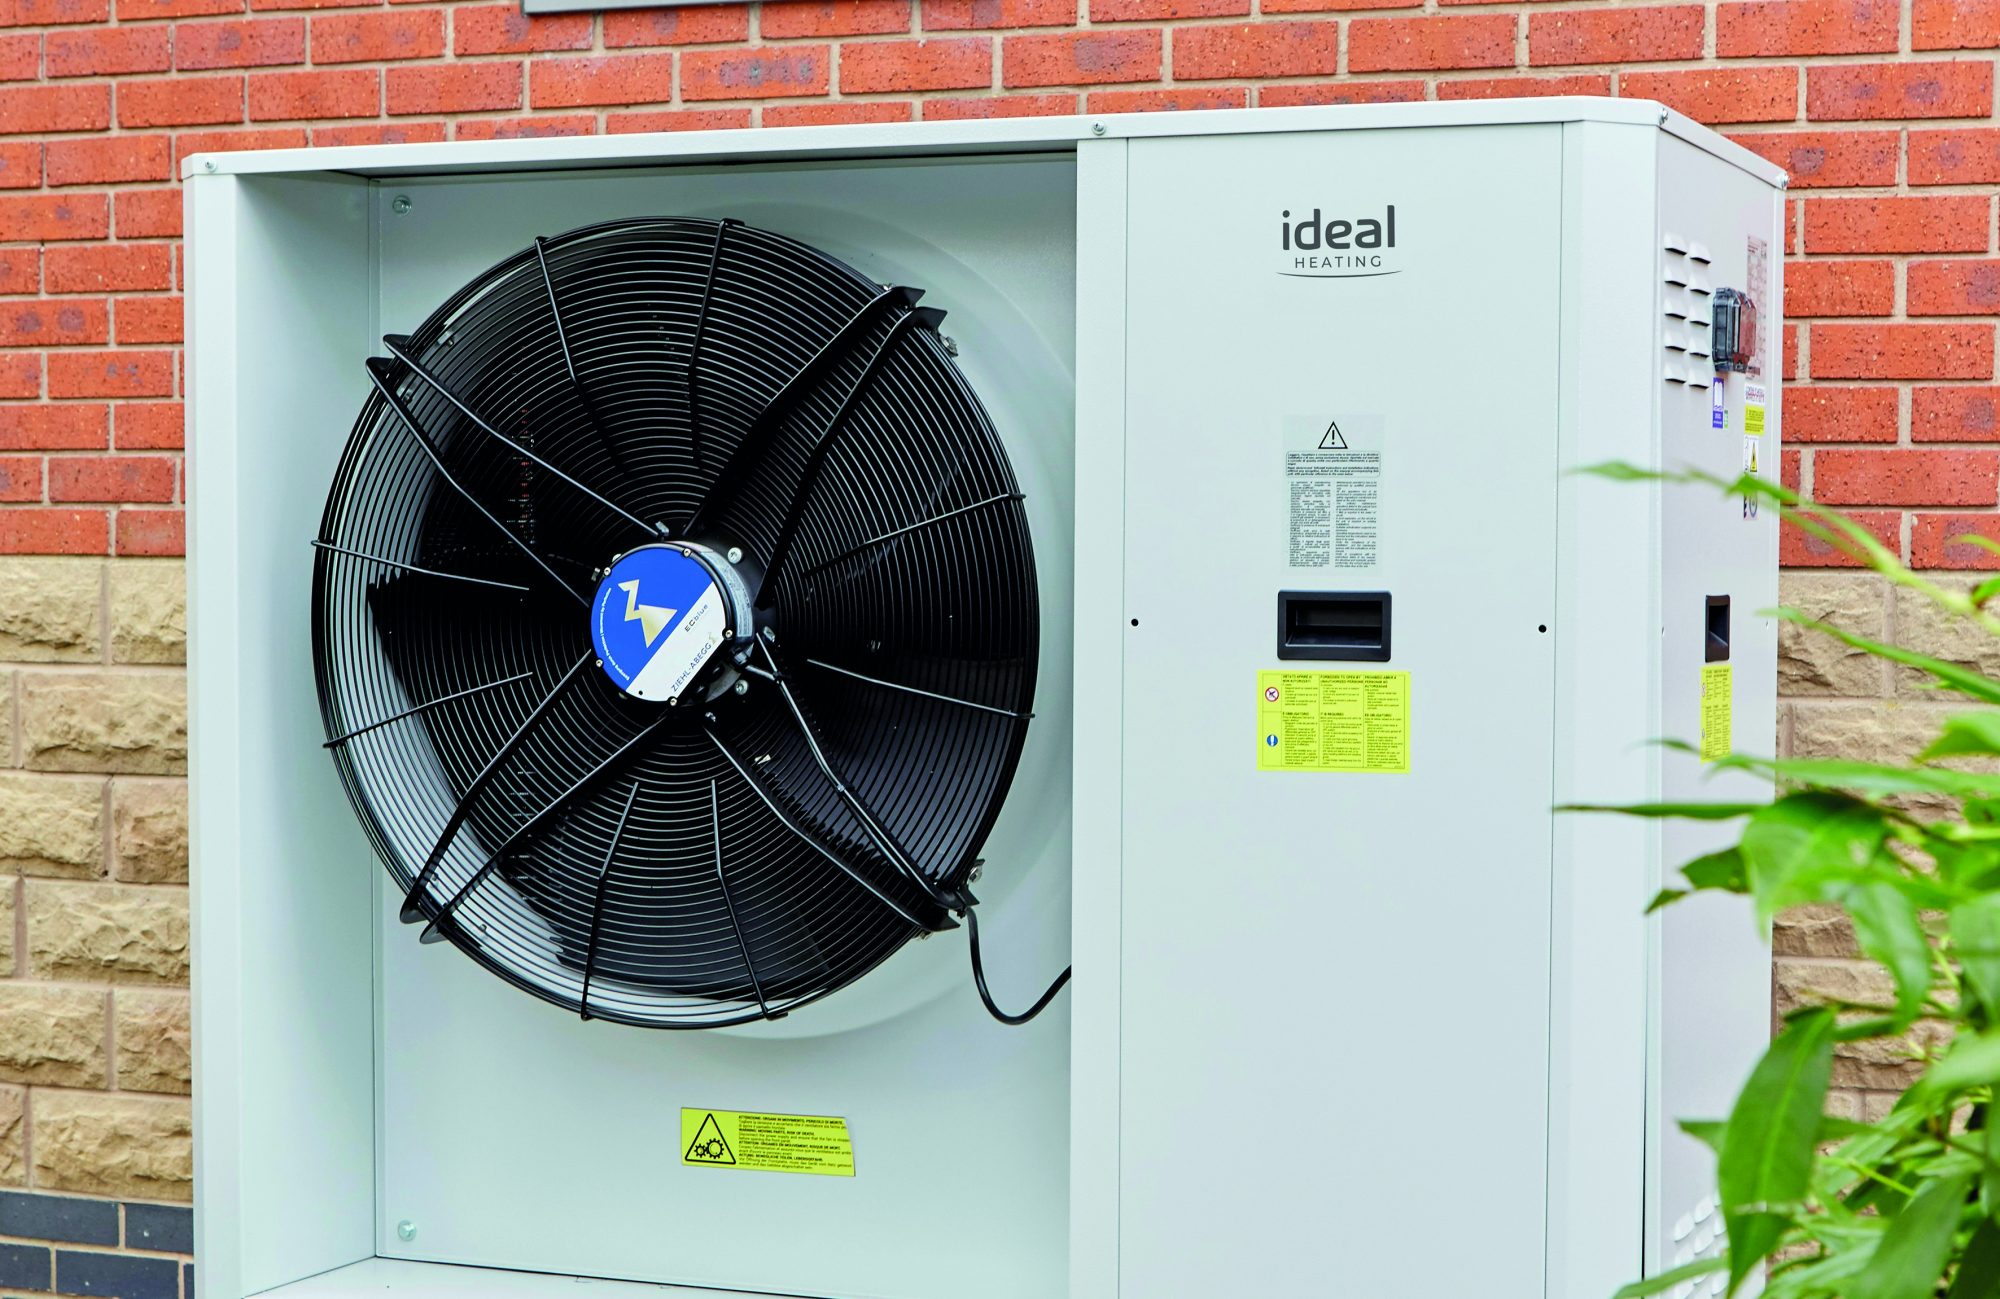 Ideal Heating Ecomod Commercial heat pump 32kW positioned outside a building[87]